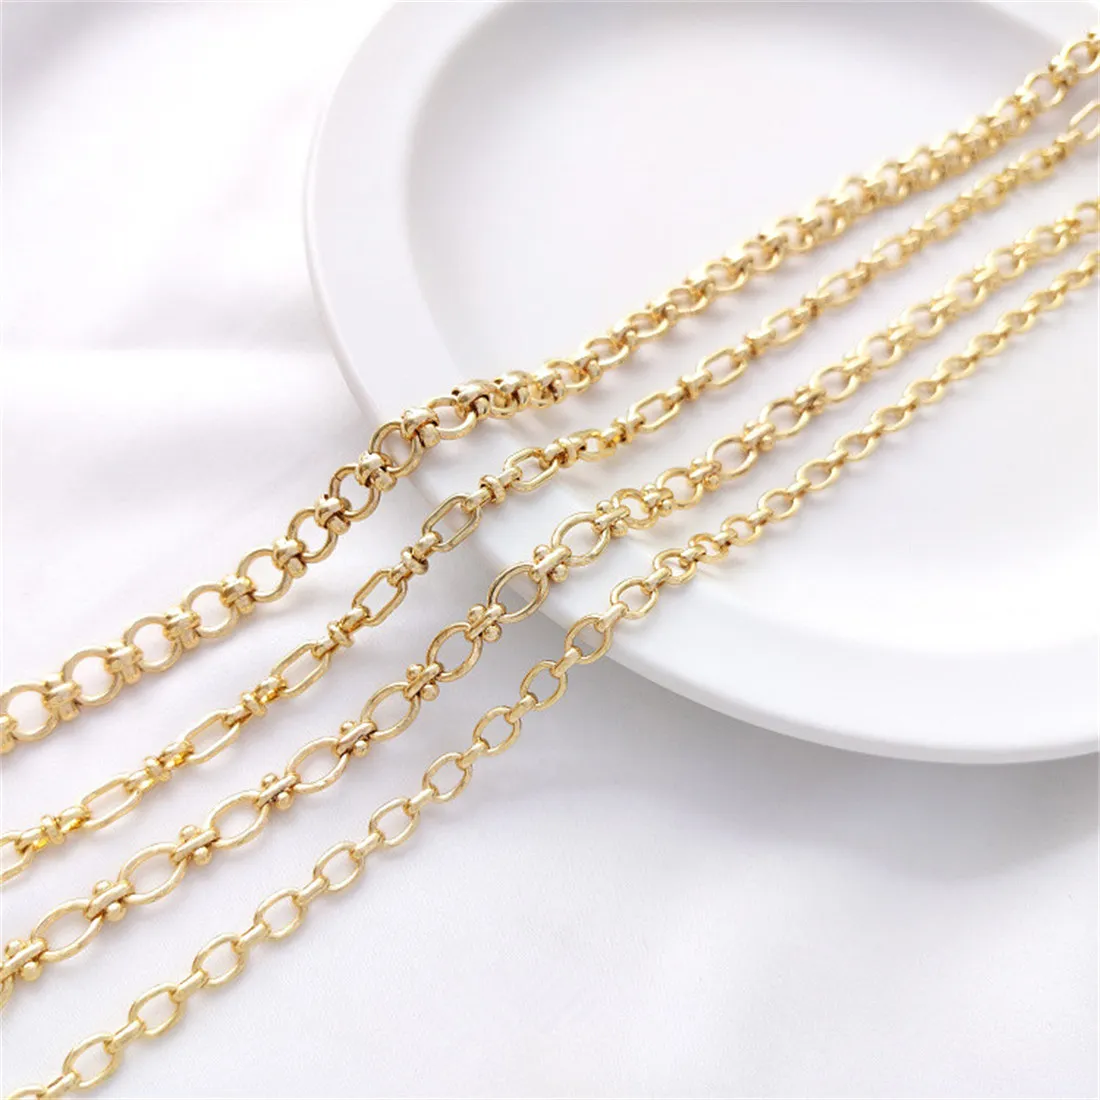 

Handmade Chain 14K Gold-filled Oval Egg-shaped Chain Long O Chain Loose Chain DIY Bracelet Necklace Jewelry Accessories B673